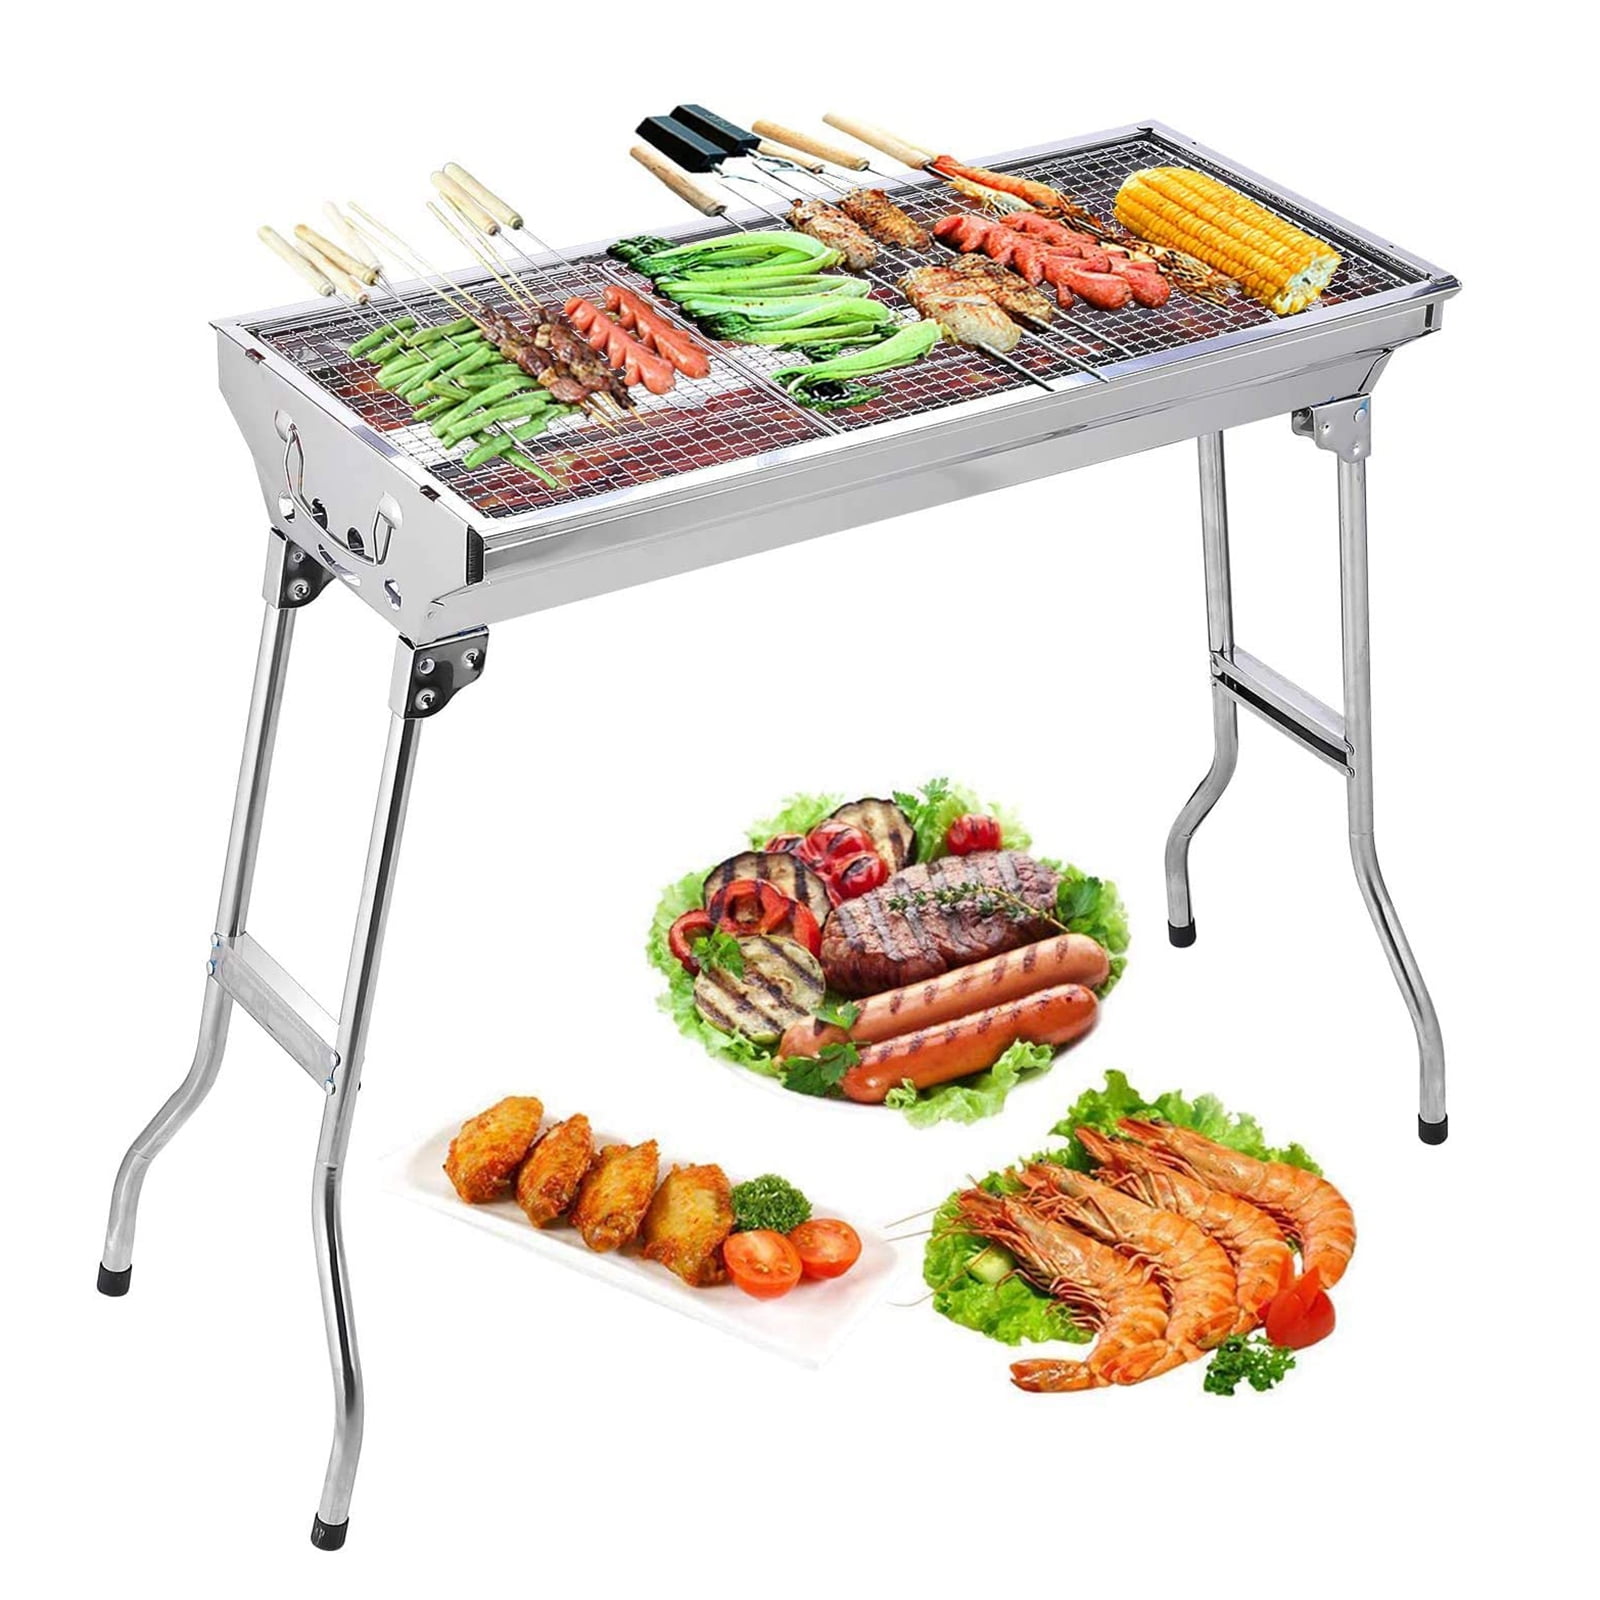 Uten Charcoal Grill, BBQ Grill Folding Portable Lightweight smoker Grill,  Barbecue Grill Small desk Tabletop Outdoor Grill for Camping Picnics Garden